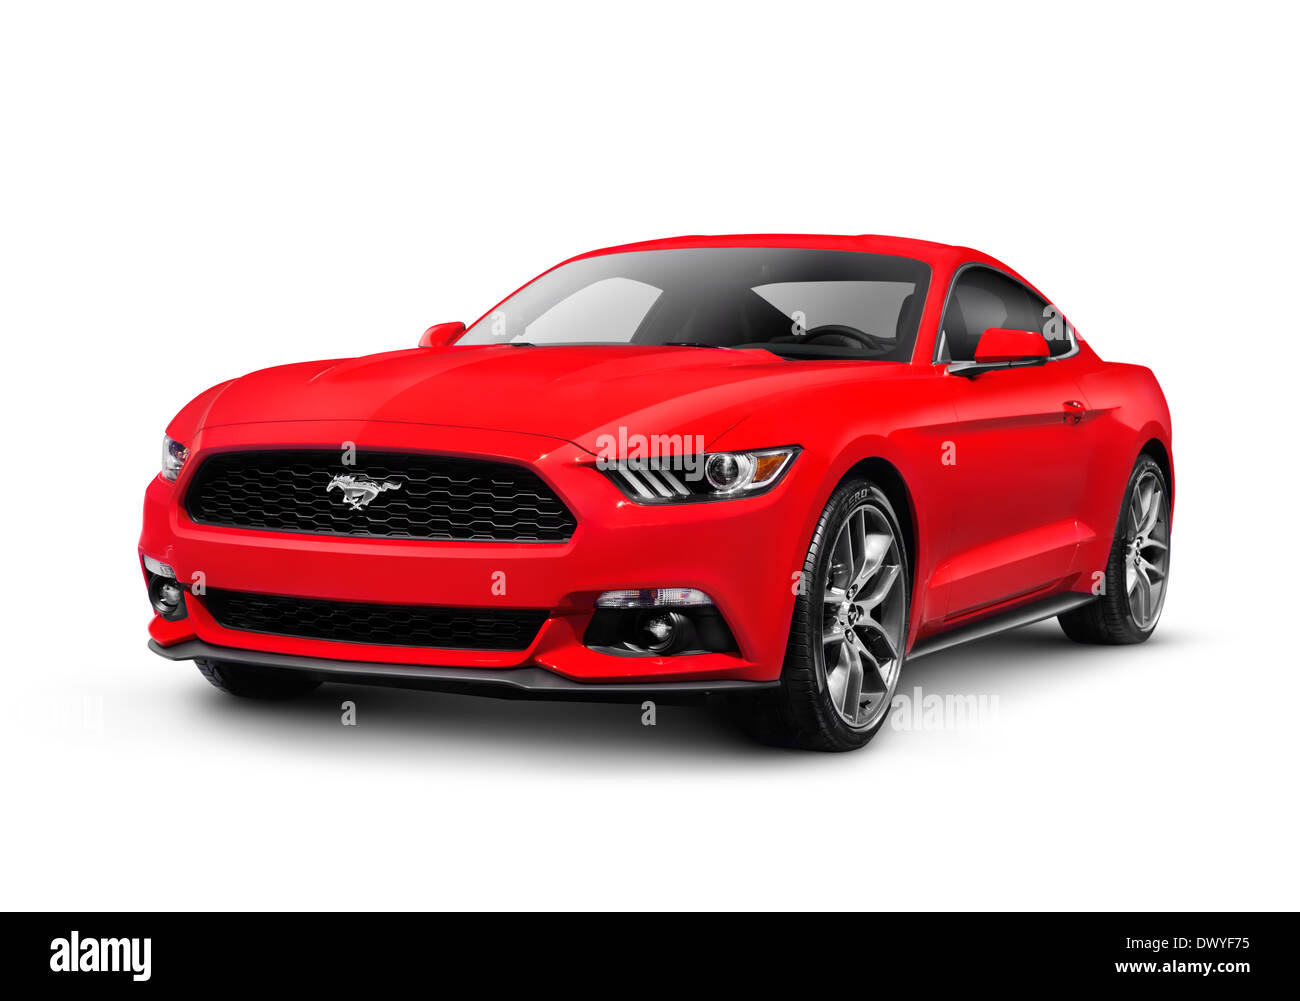 Red 2015 Ford Mustang sports car isolated on white background with clipping path Stock Photo